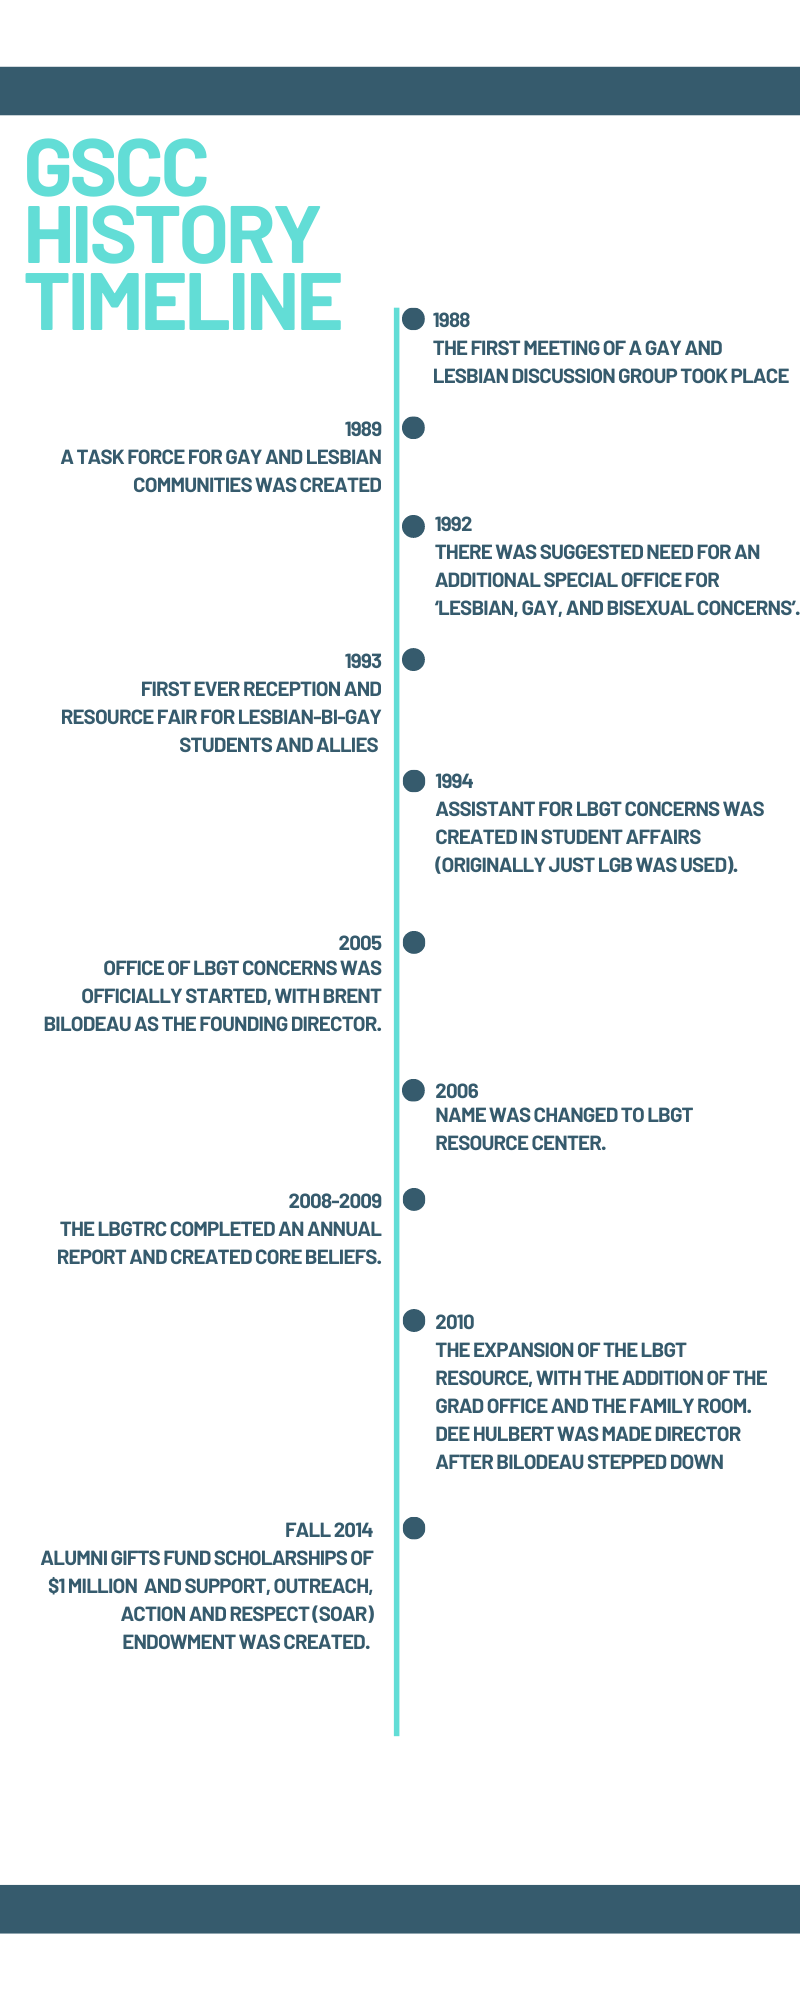 visual timeline of GSCC history: full text included below.